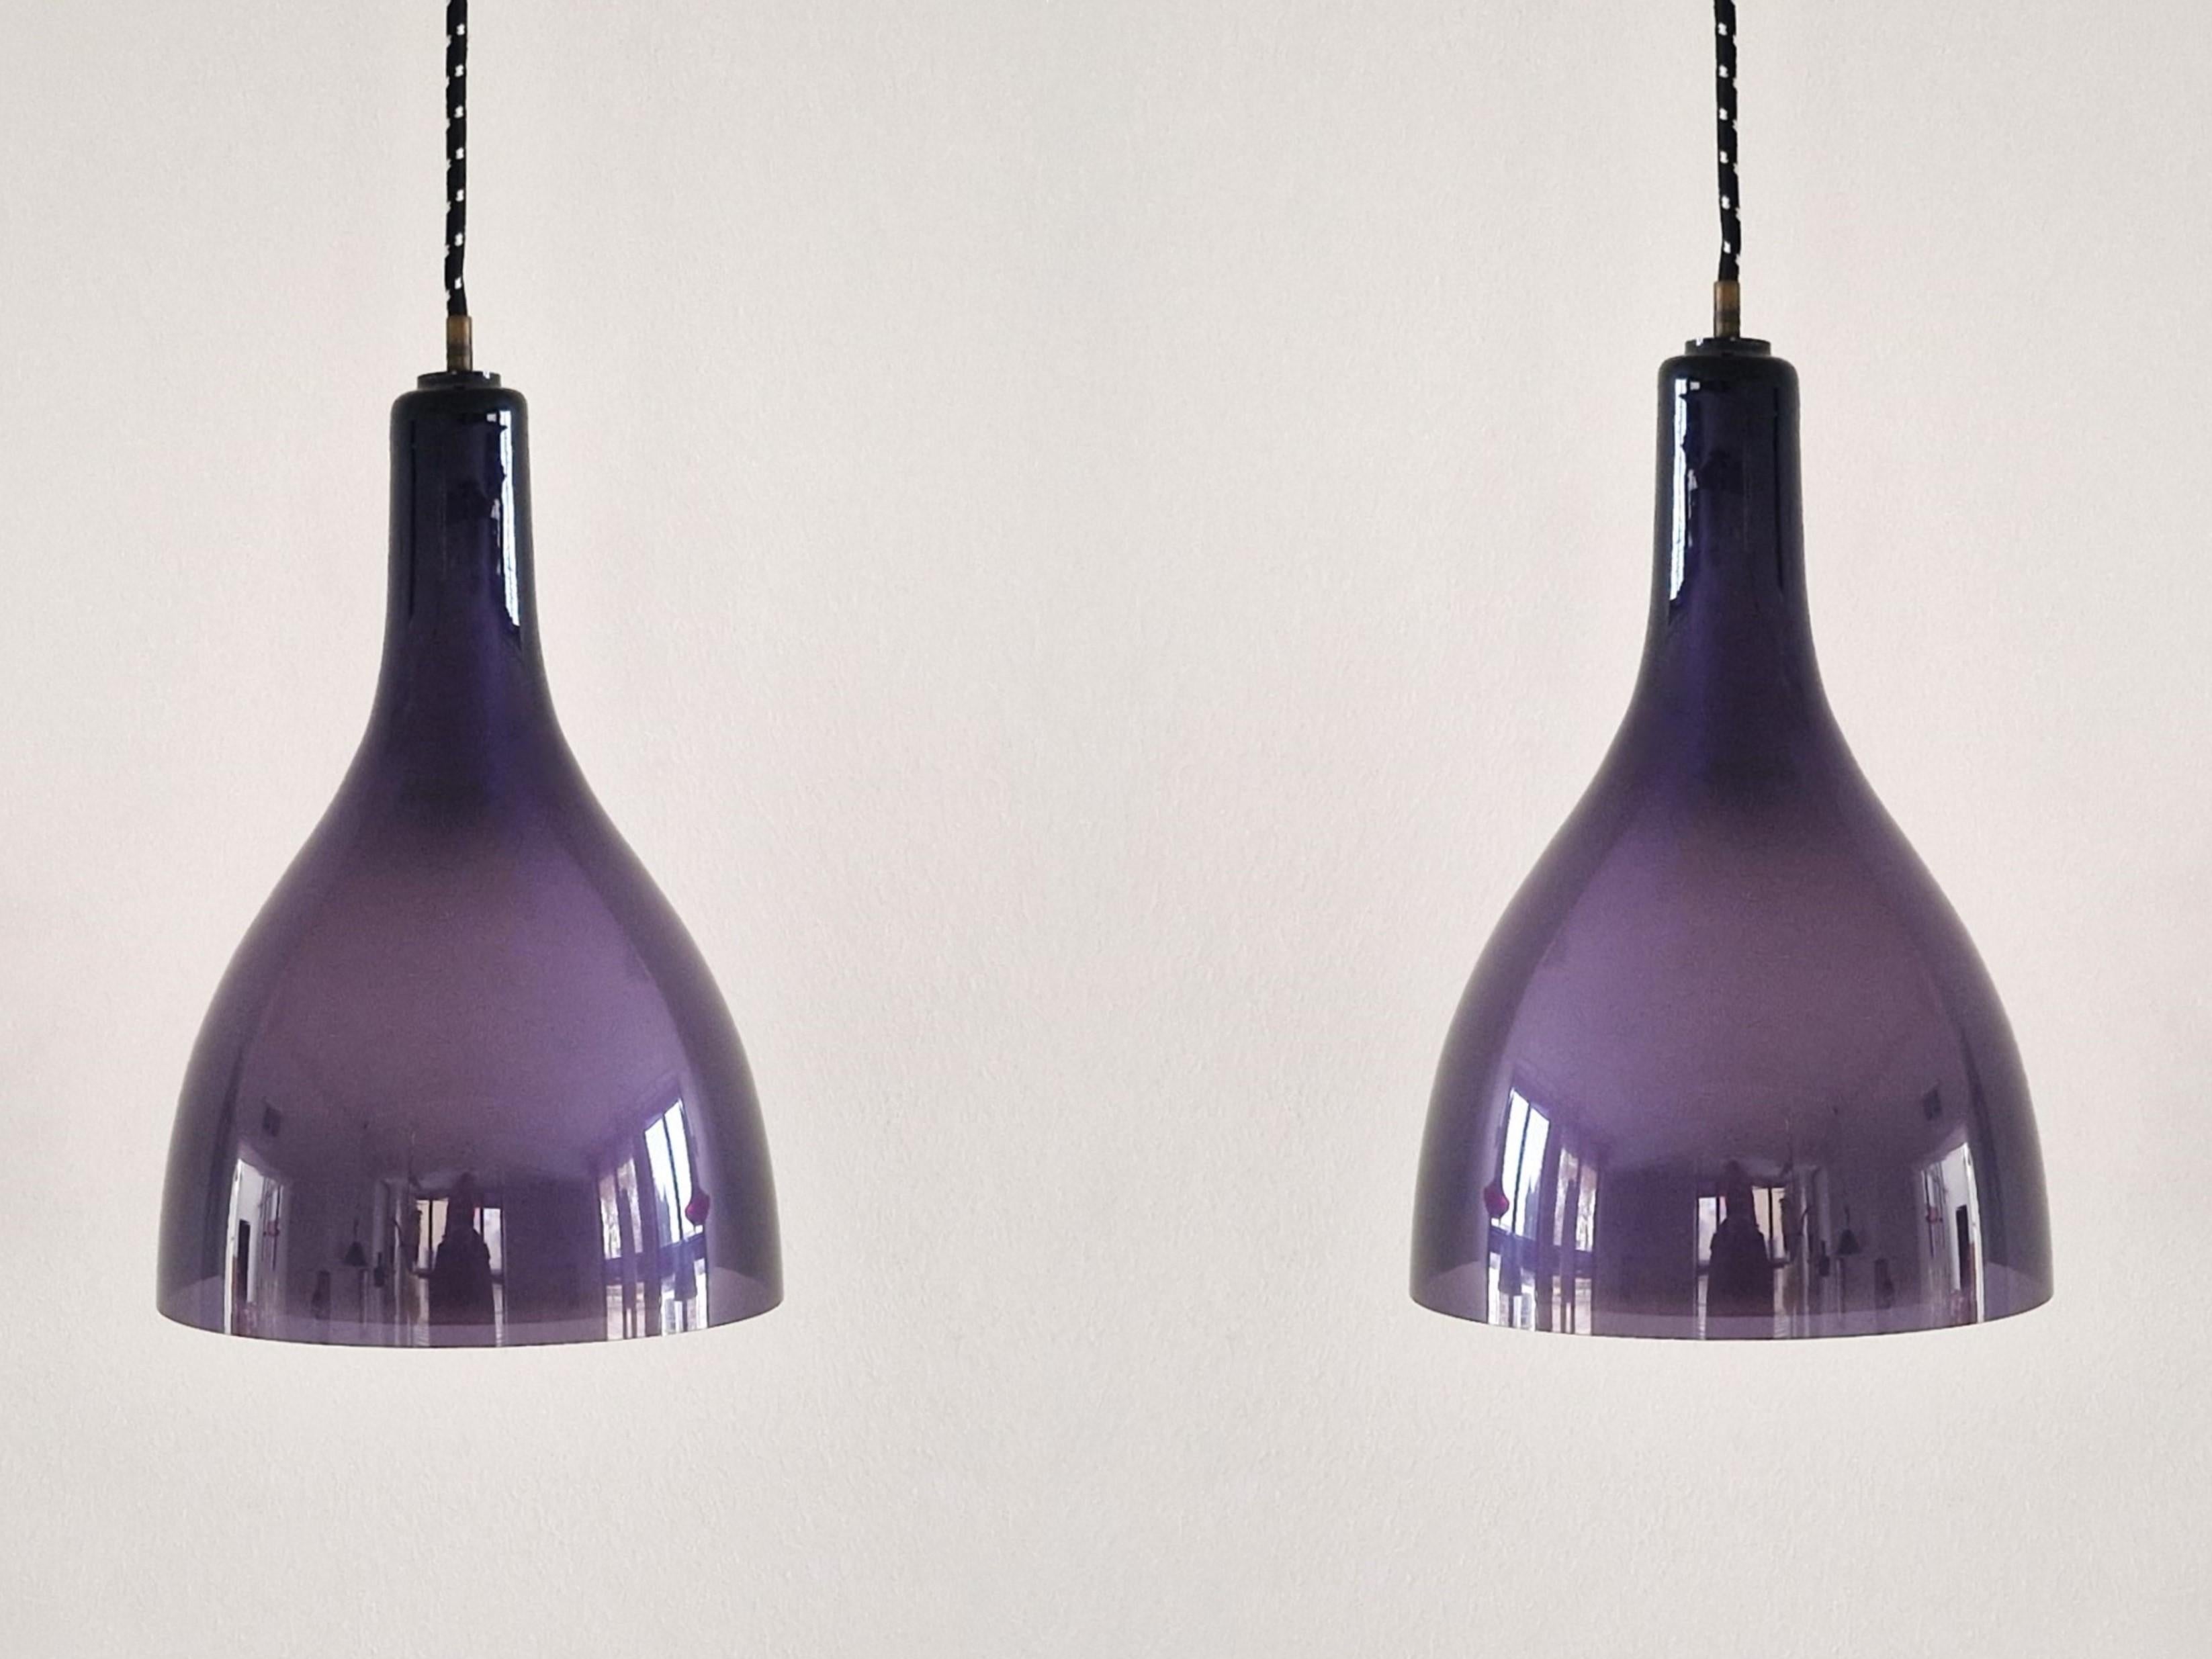 These beautiful and elegant pendant lamps are from the 1960's or 1970's. The lamps have a clear purple glass exterior shade and a smaller opaline white interior shade. They give a good and clear downwards light and a very decorative and warm shine